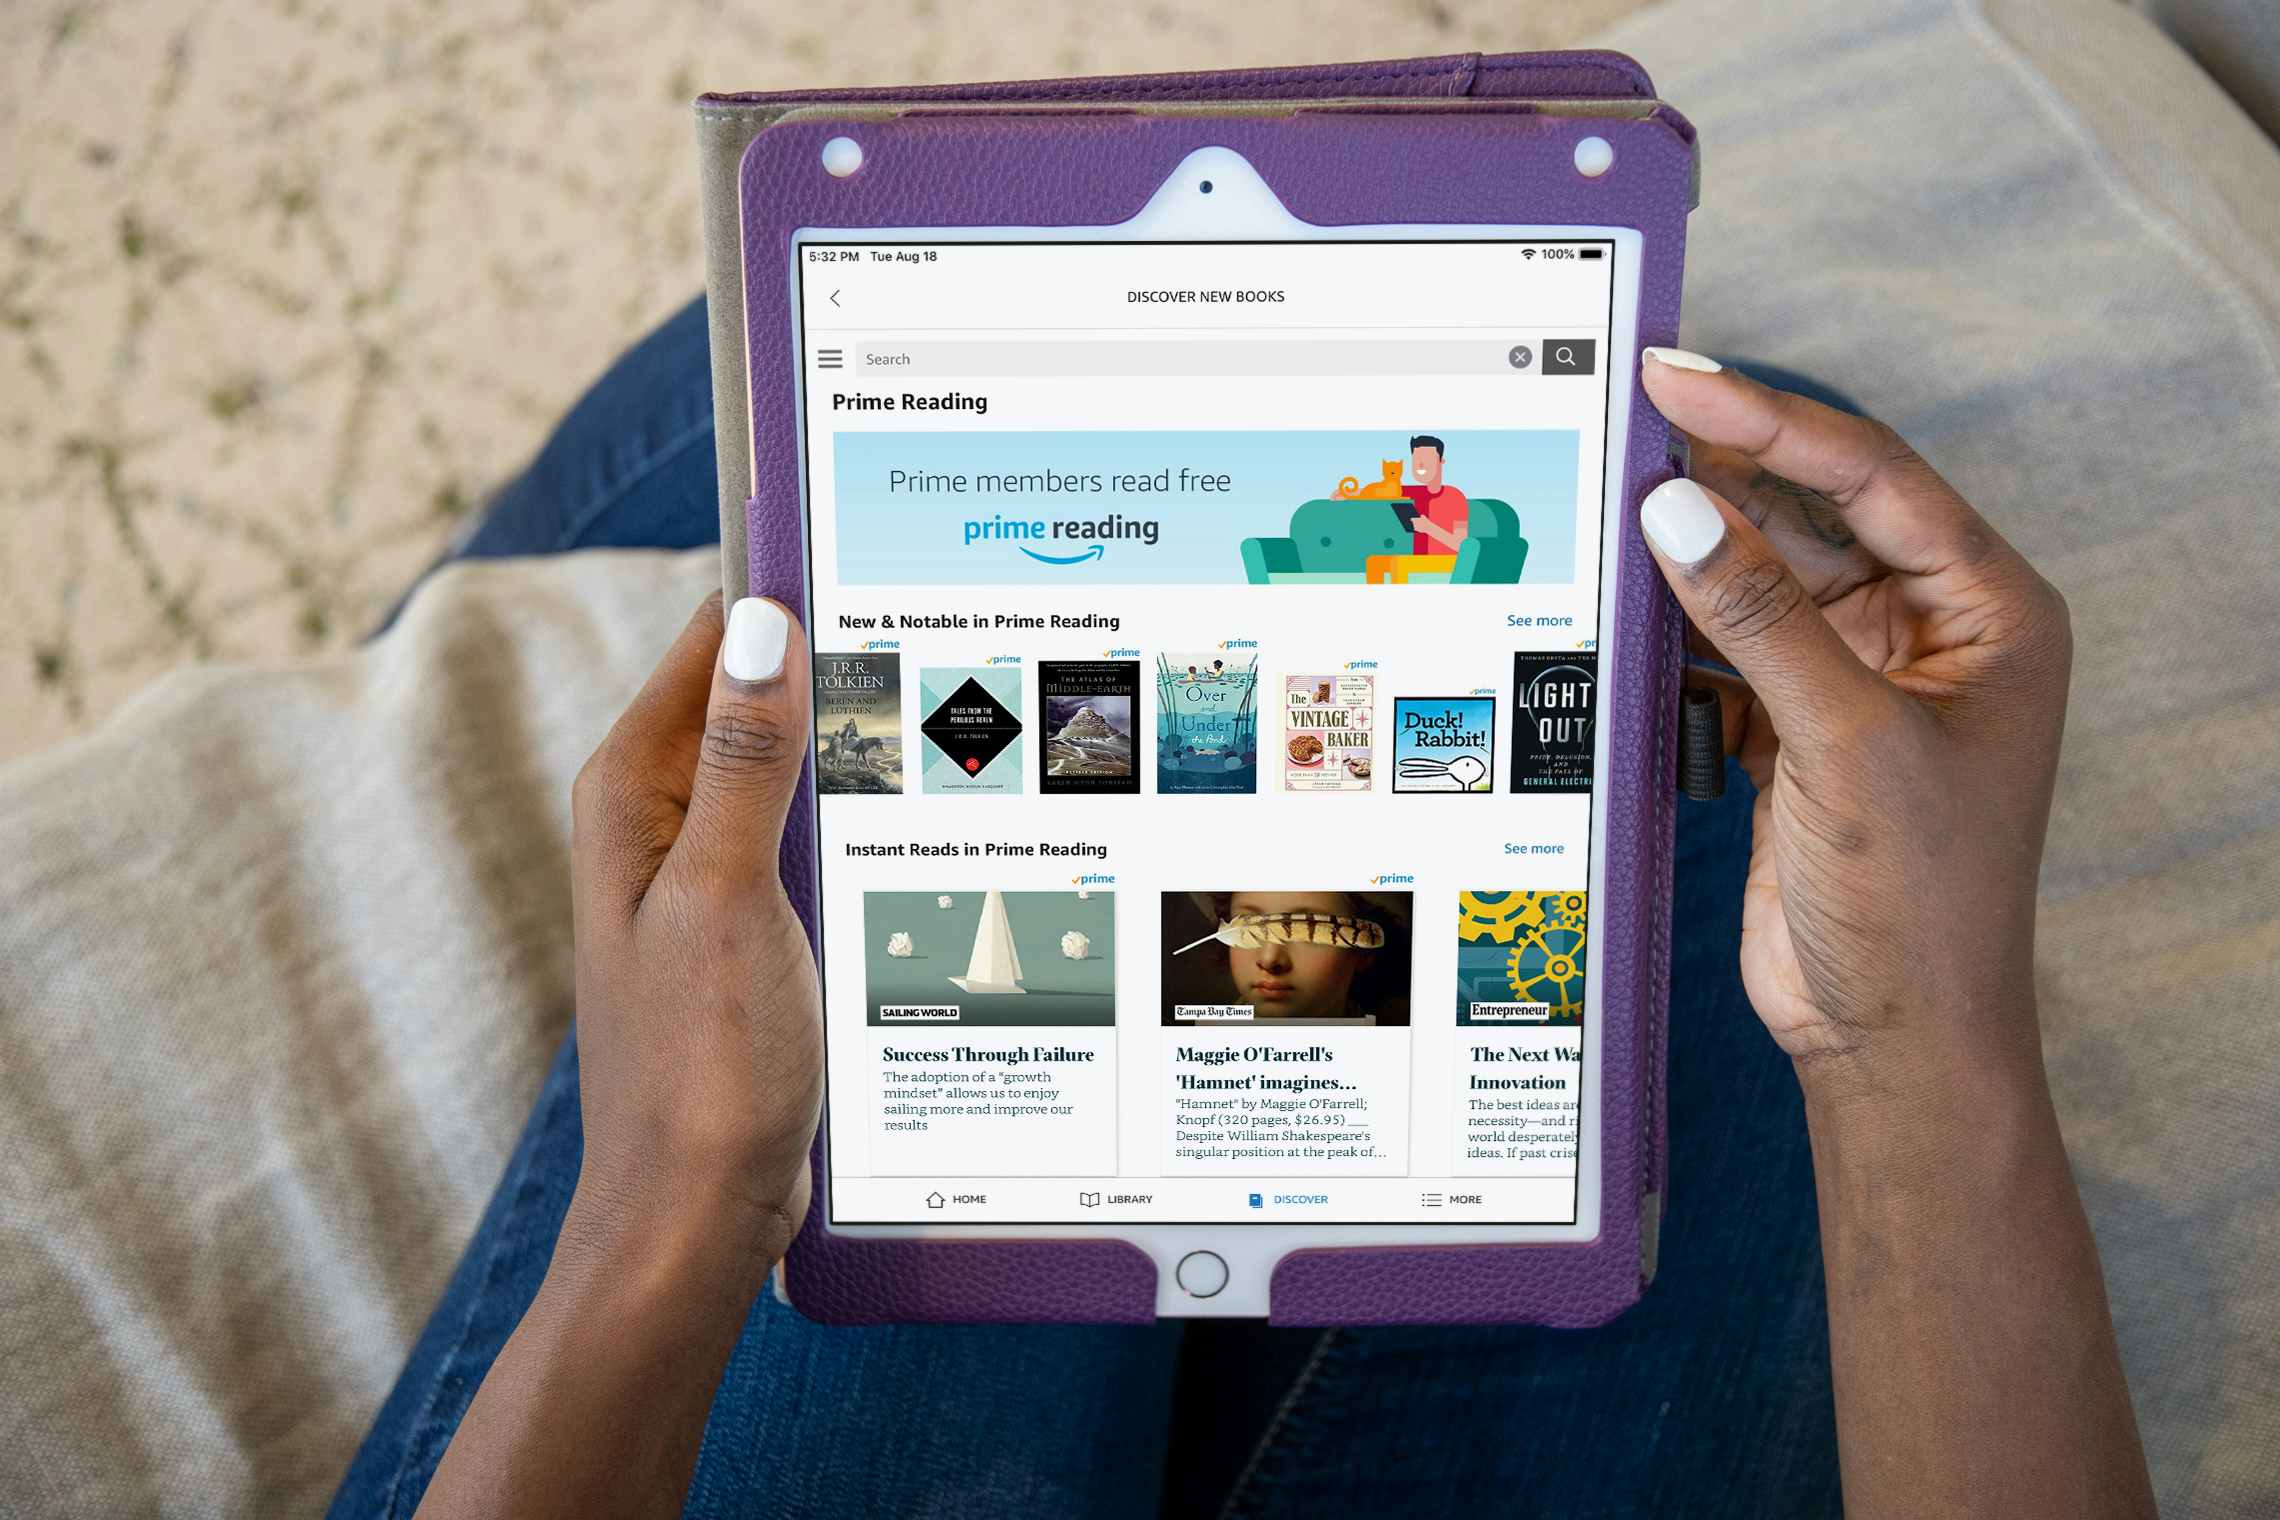 A woman sitting on a couch, holding an iPad which is displaying the Amazon website's page for Prime Reading.